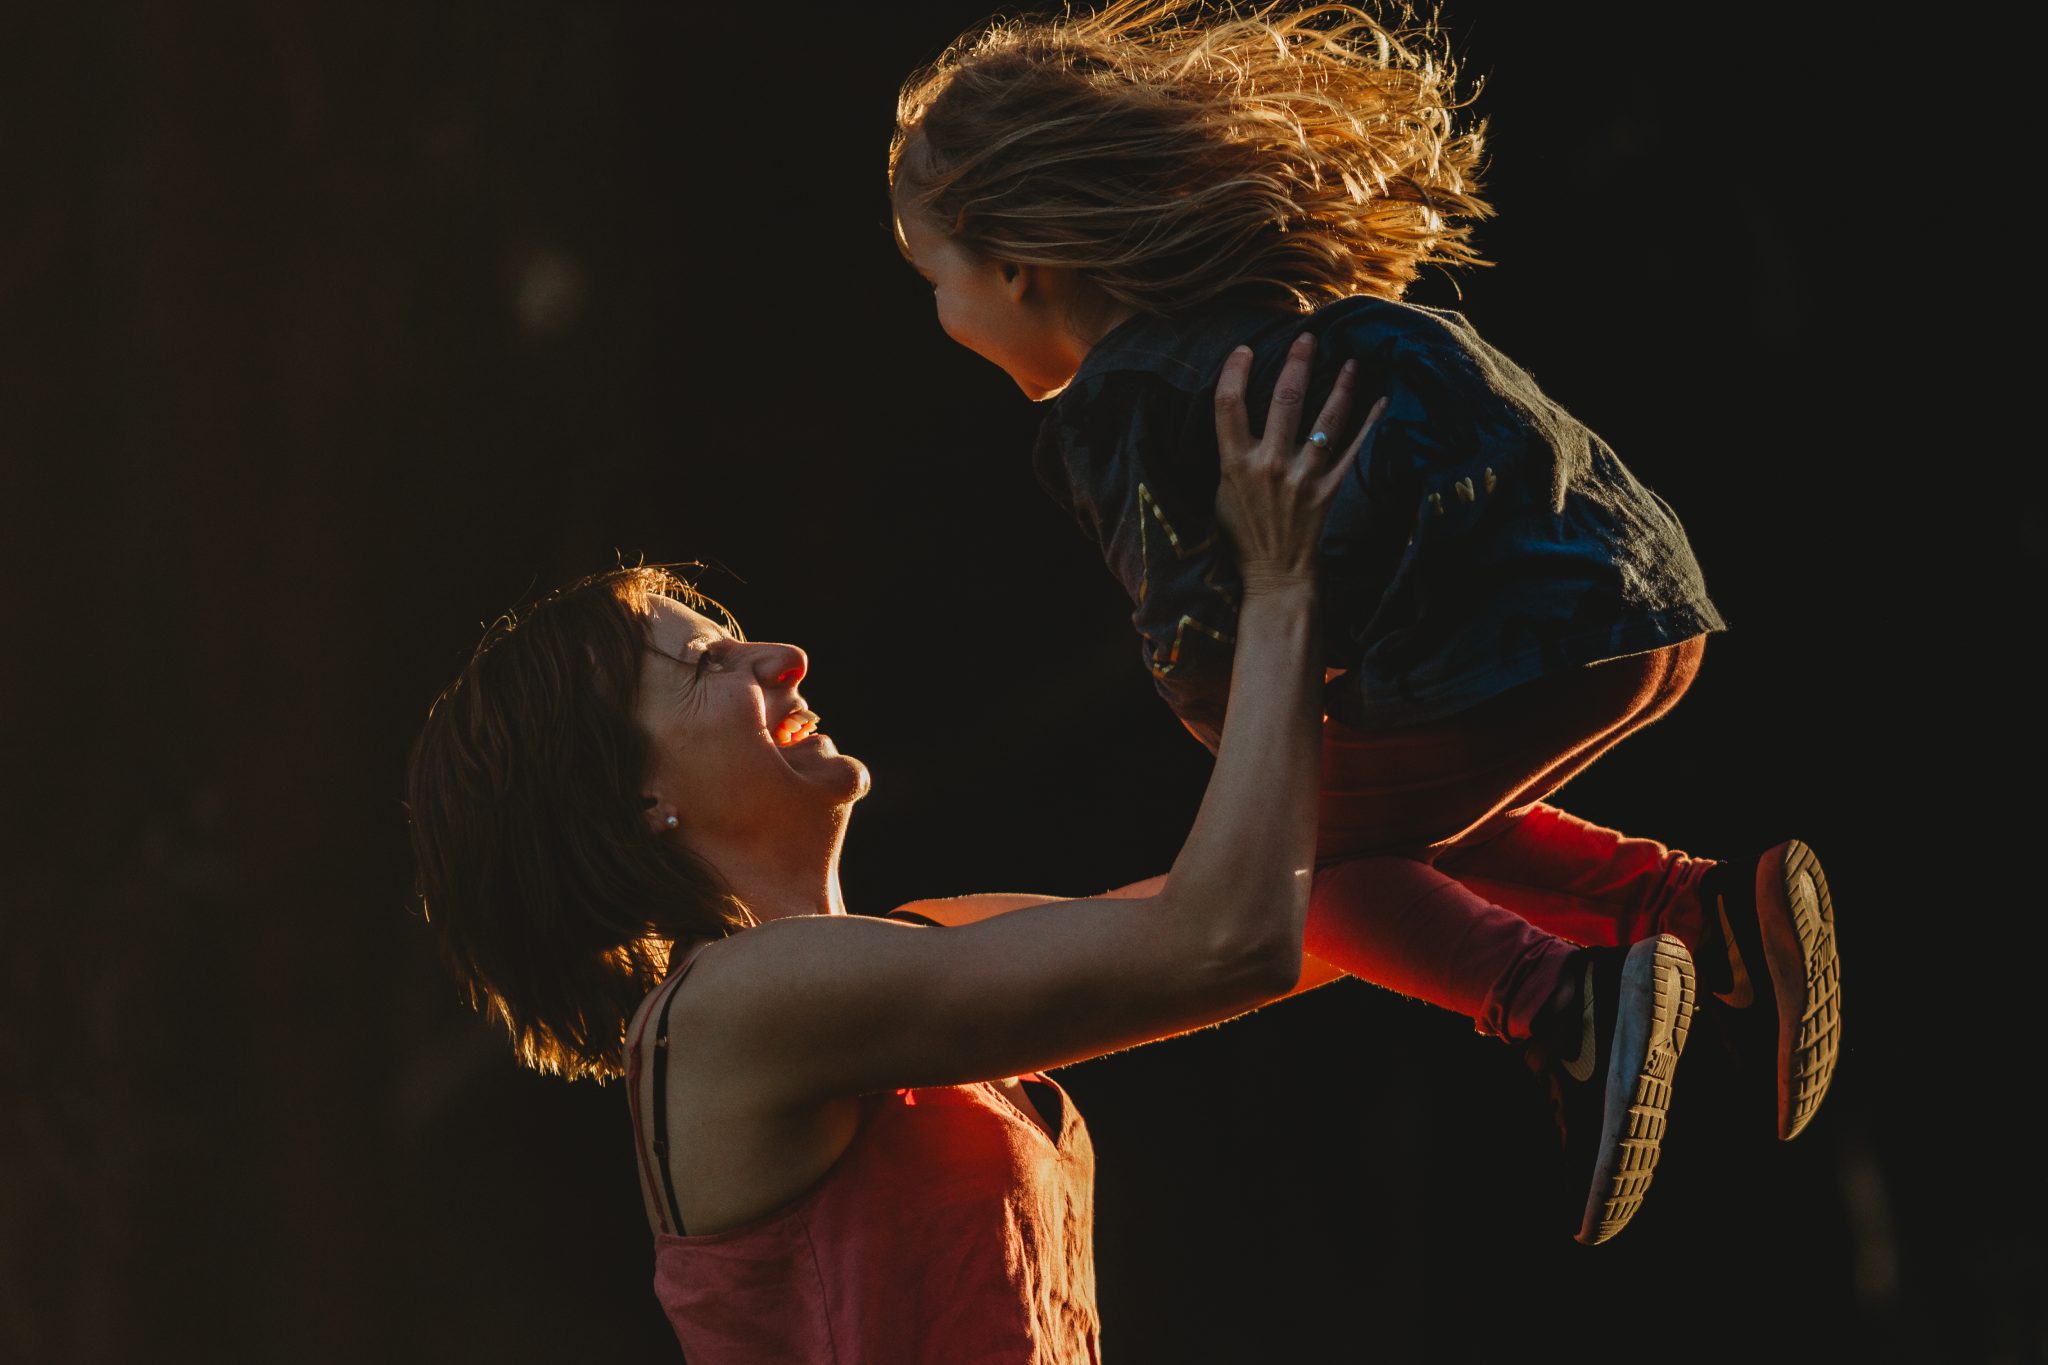 Woman smiling while lifting daughter up into the air